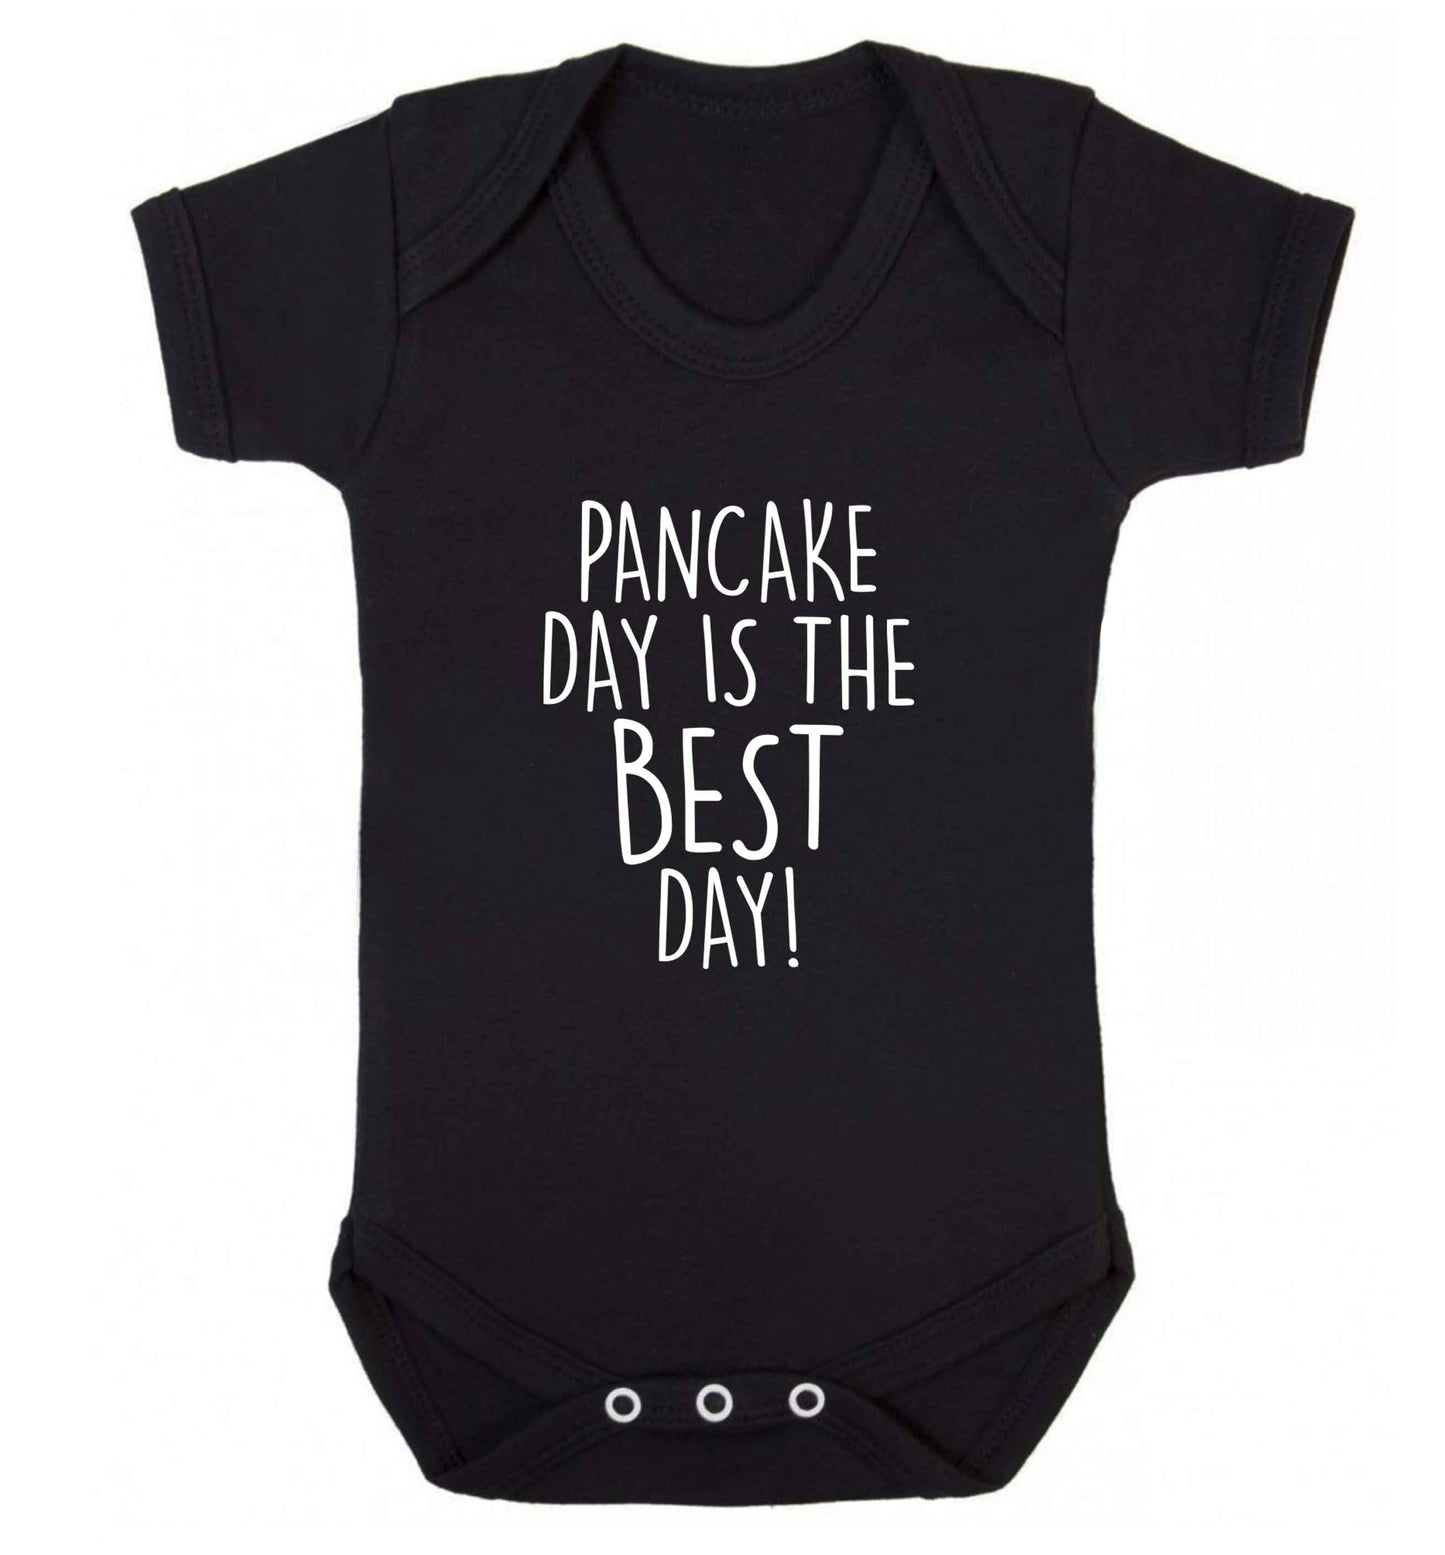 Pancake day is the best day baby vest black 18-24 months